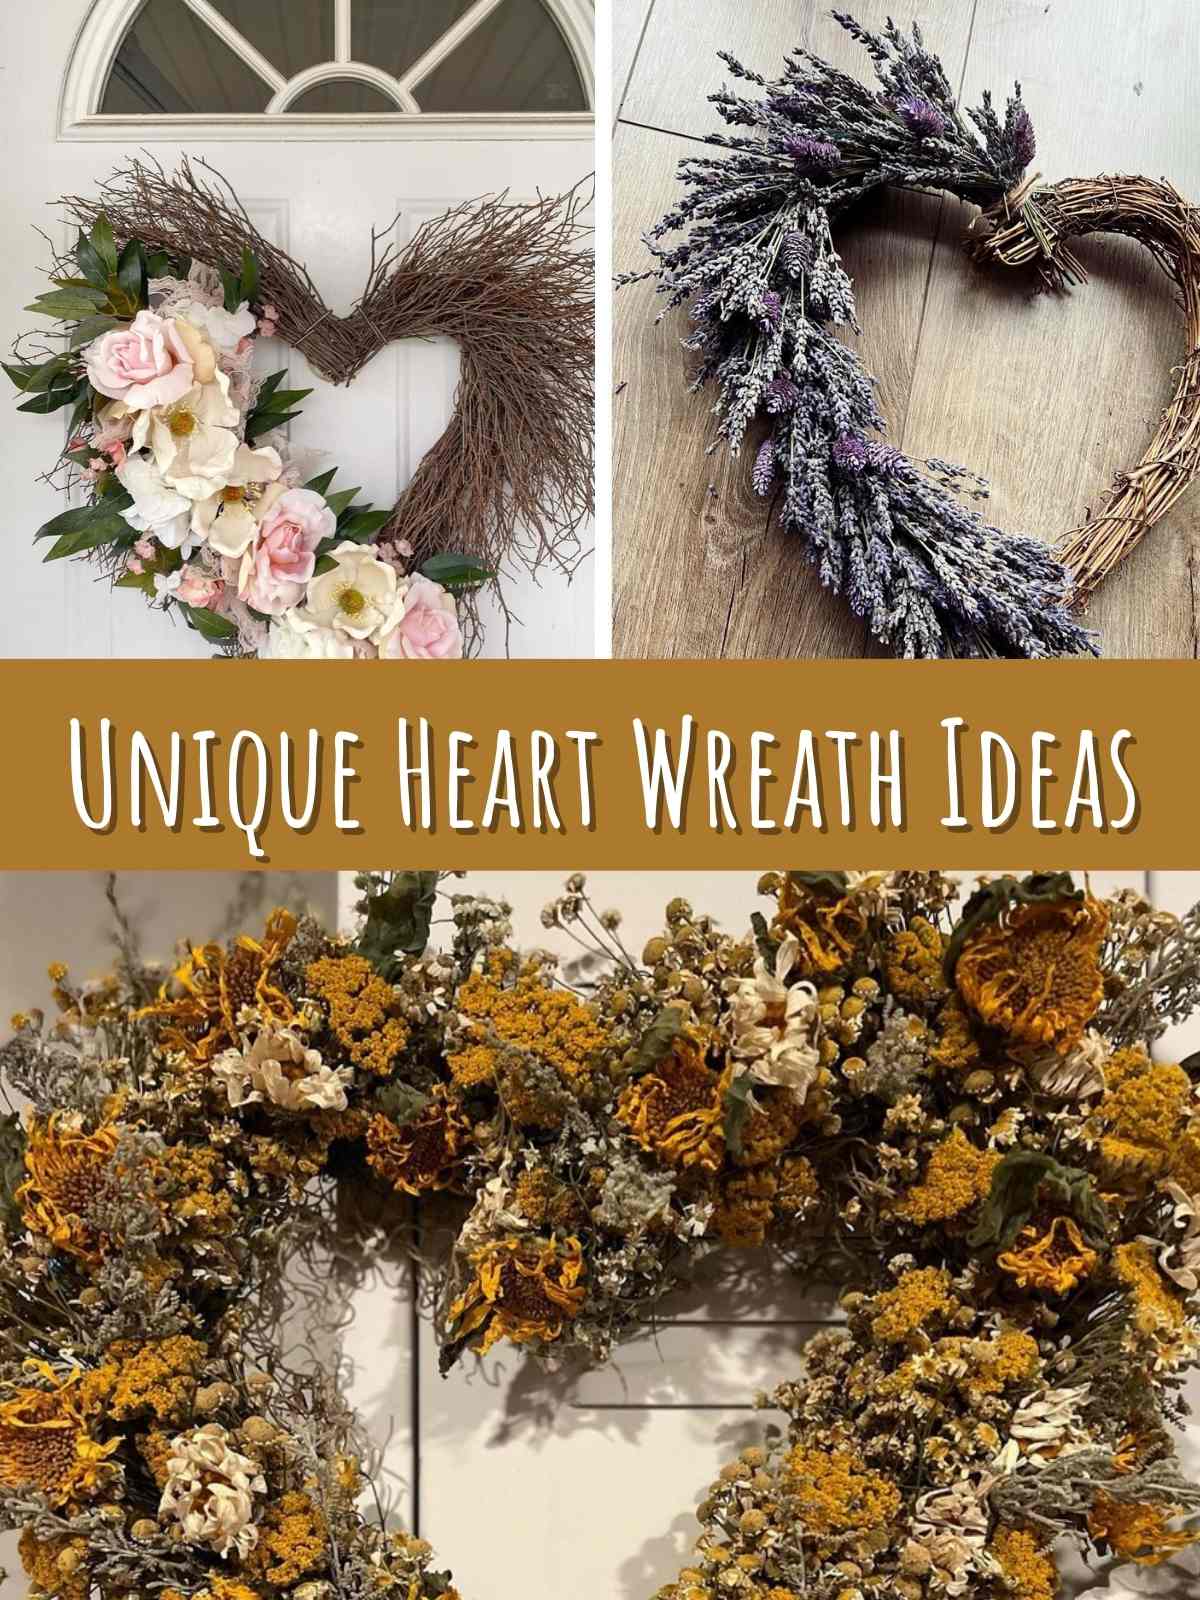 Unique Heart Wreath Ideas. 3 Different Photos with Dried Flowers on heart wreath